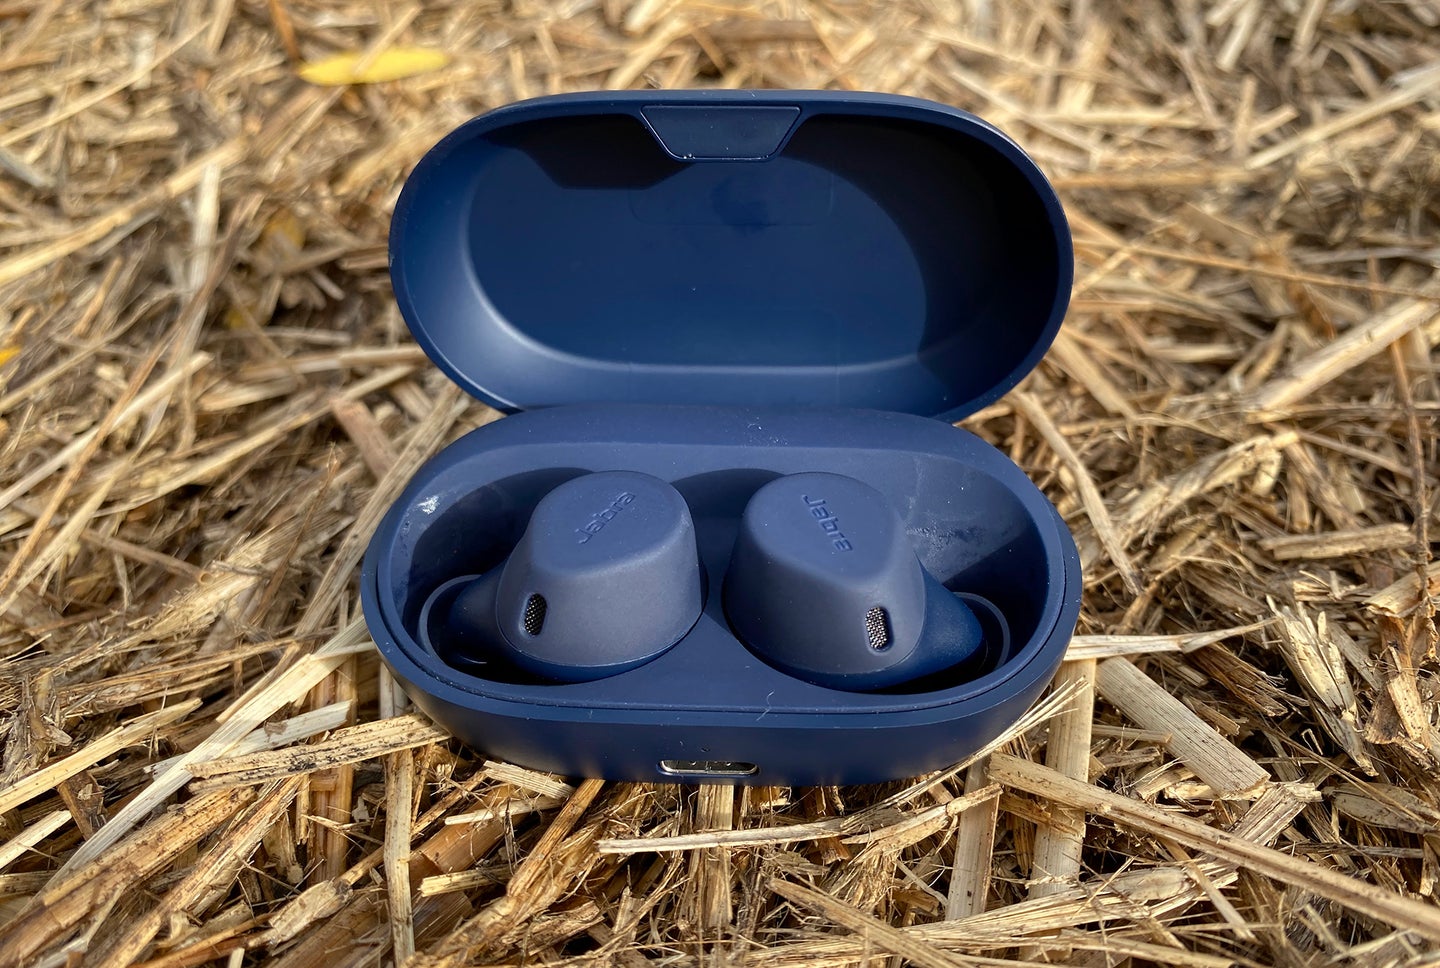 The Jabra Elite 7 Active earbuds in their case sitting on hay